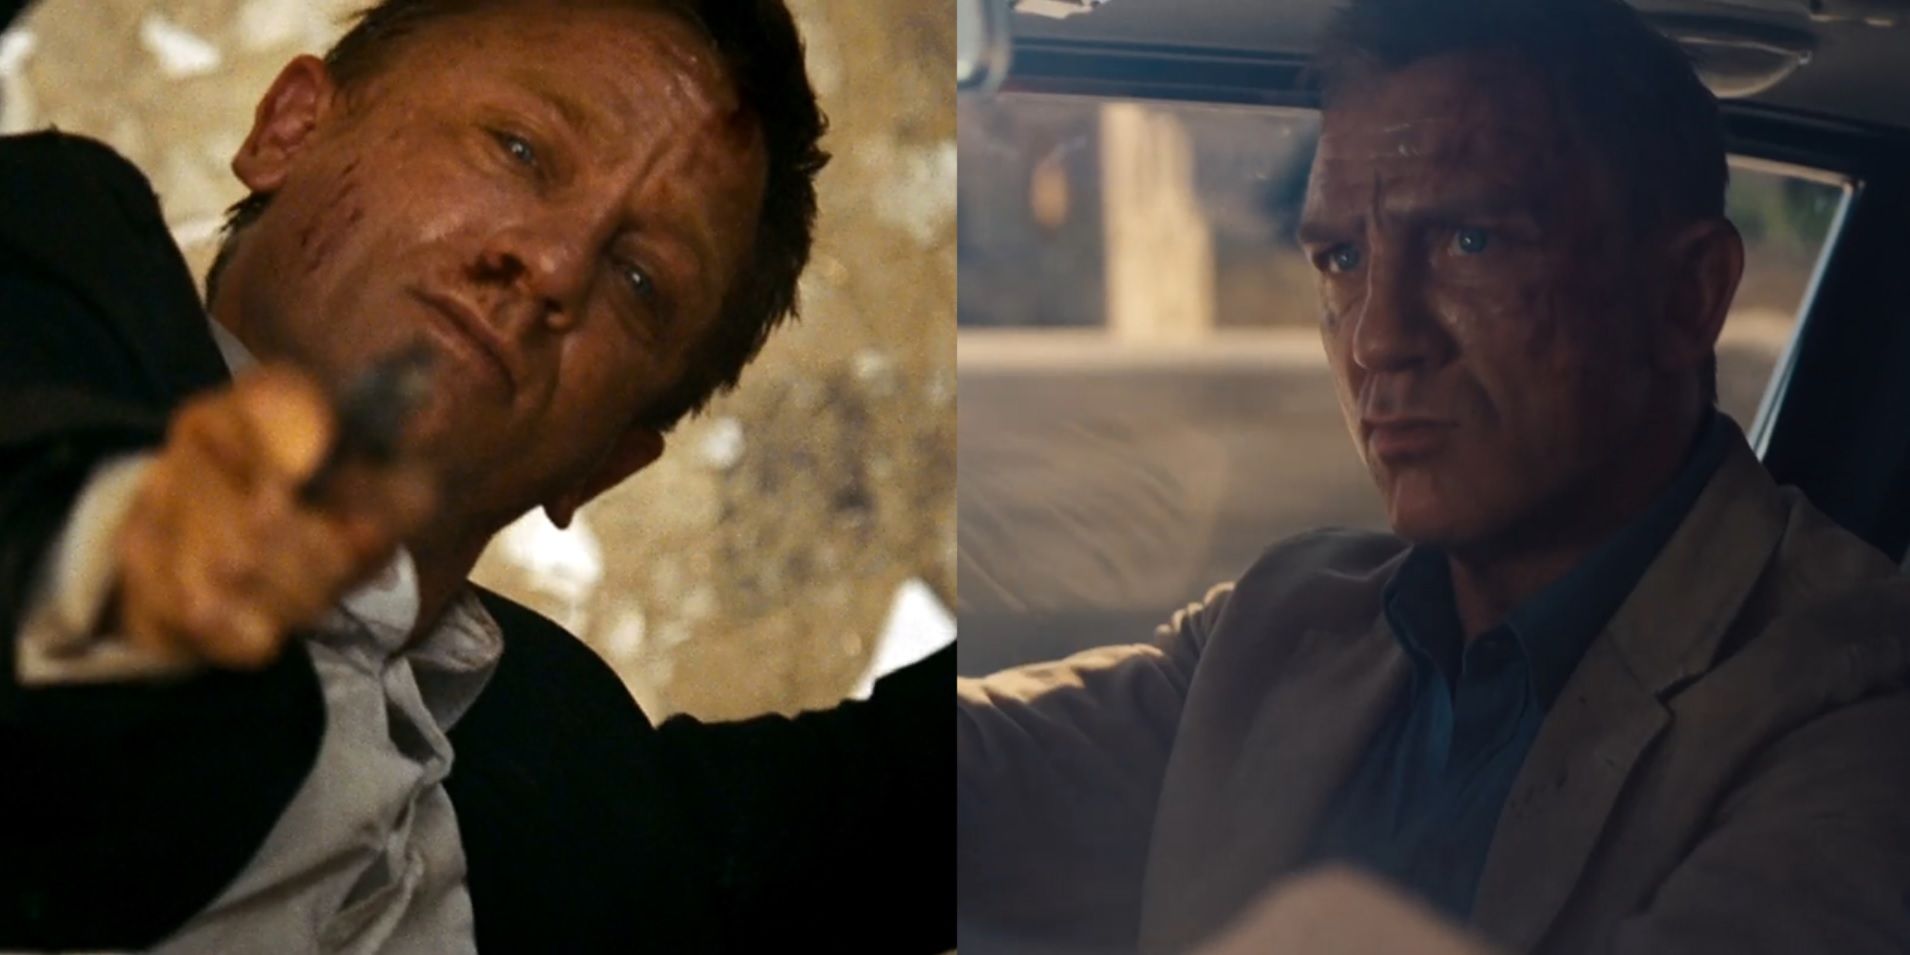 Split image of Daniel Craig holding a gun in Quantum of Solace and driving a car in No Time to Die